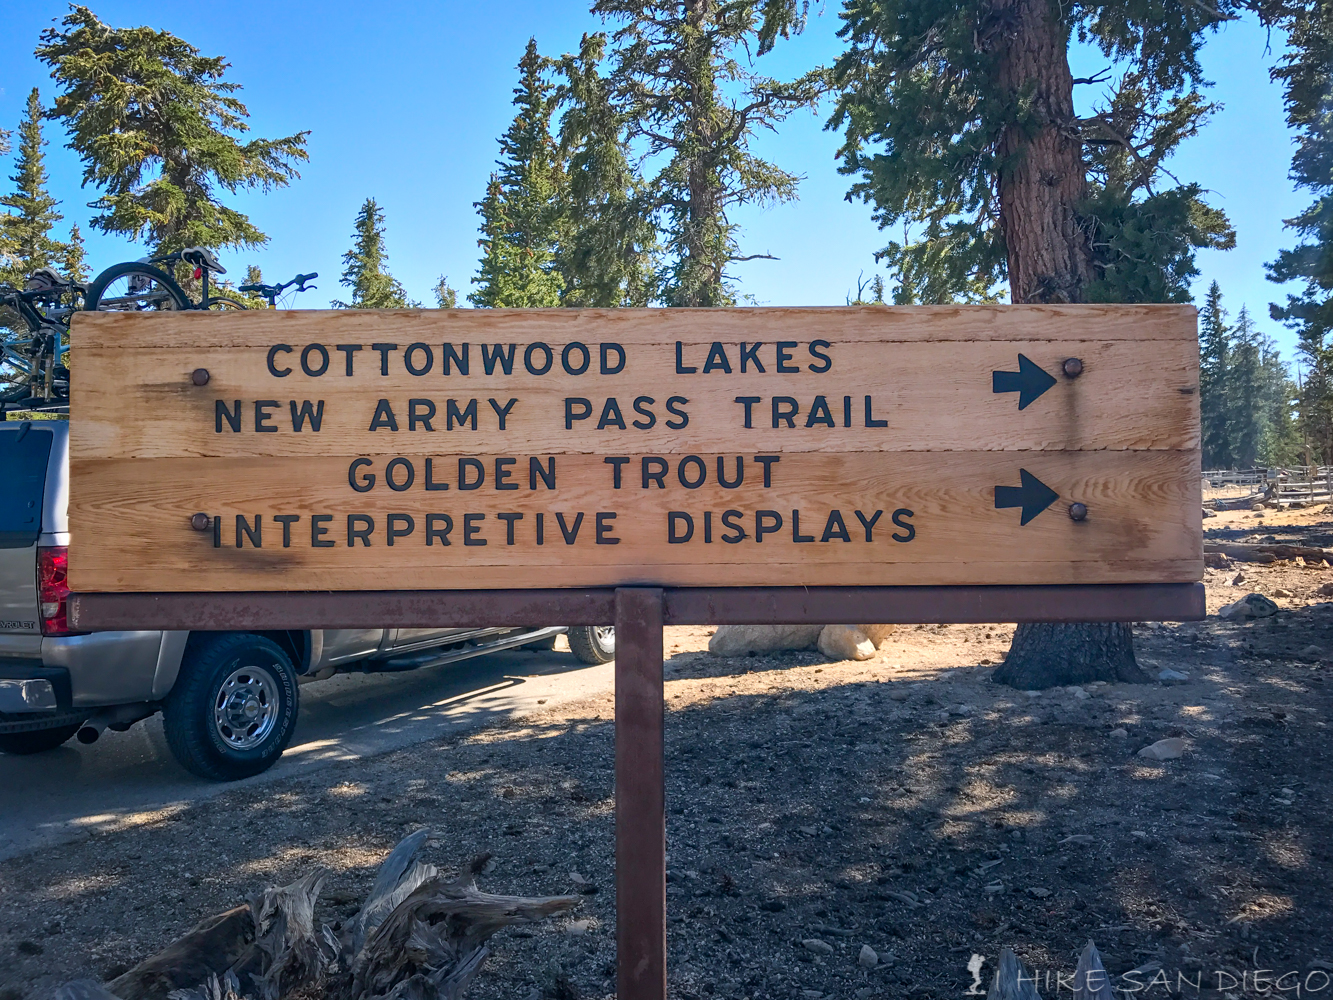 Start of the Cottonwood Lakes trail in the Horseshoe Meadows area